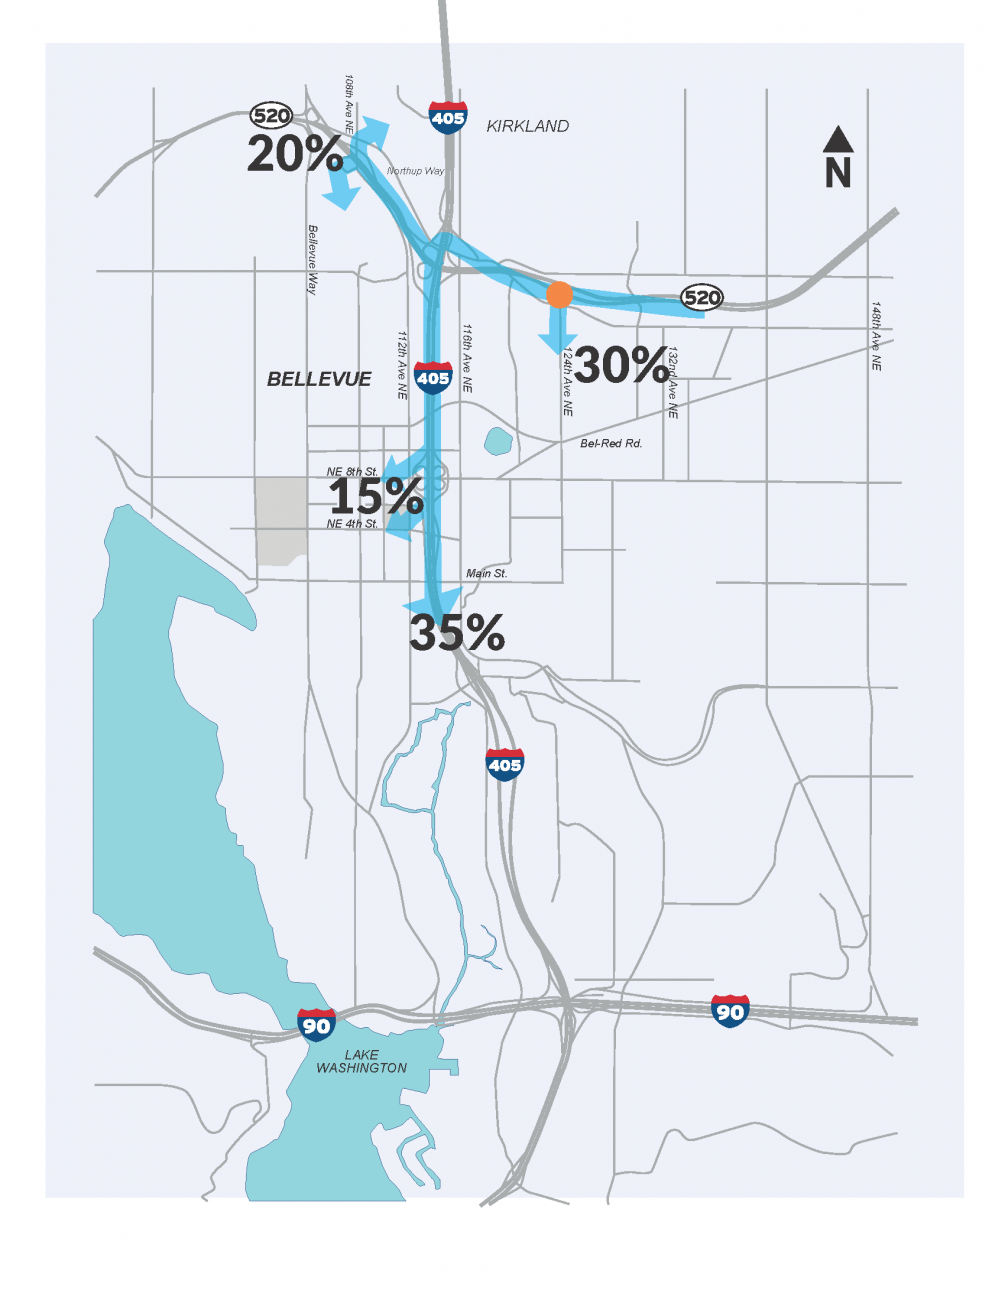 A map showing estimated westbound traffic patterns after these project improvements. 